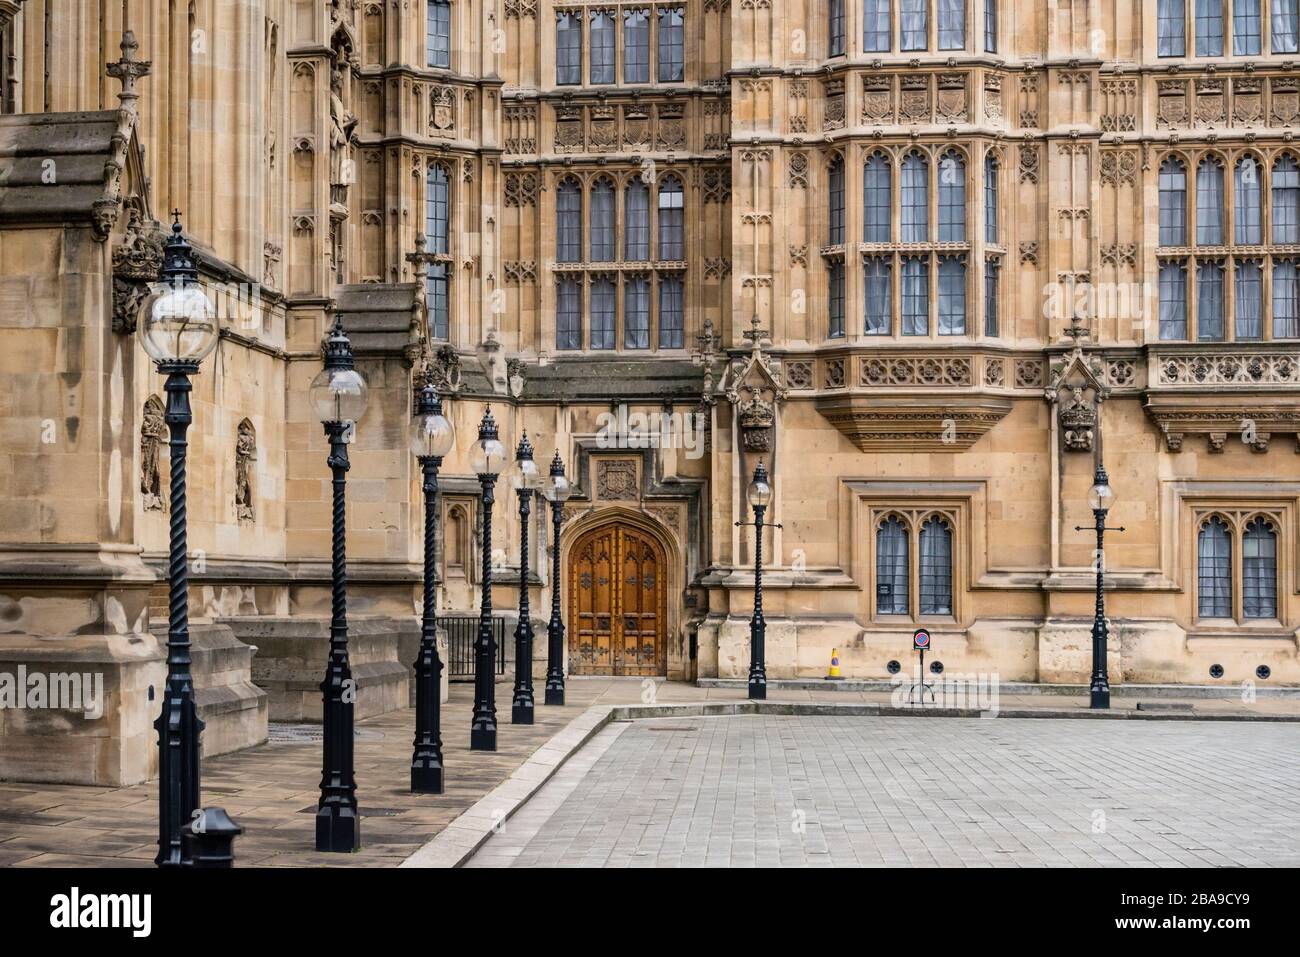 Architectural details of Palace of Westminster, London, UK Stock Photo